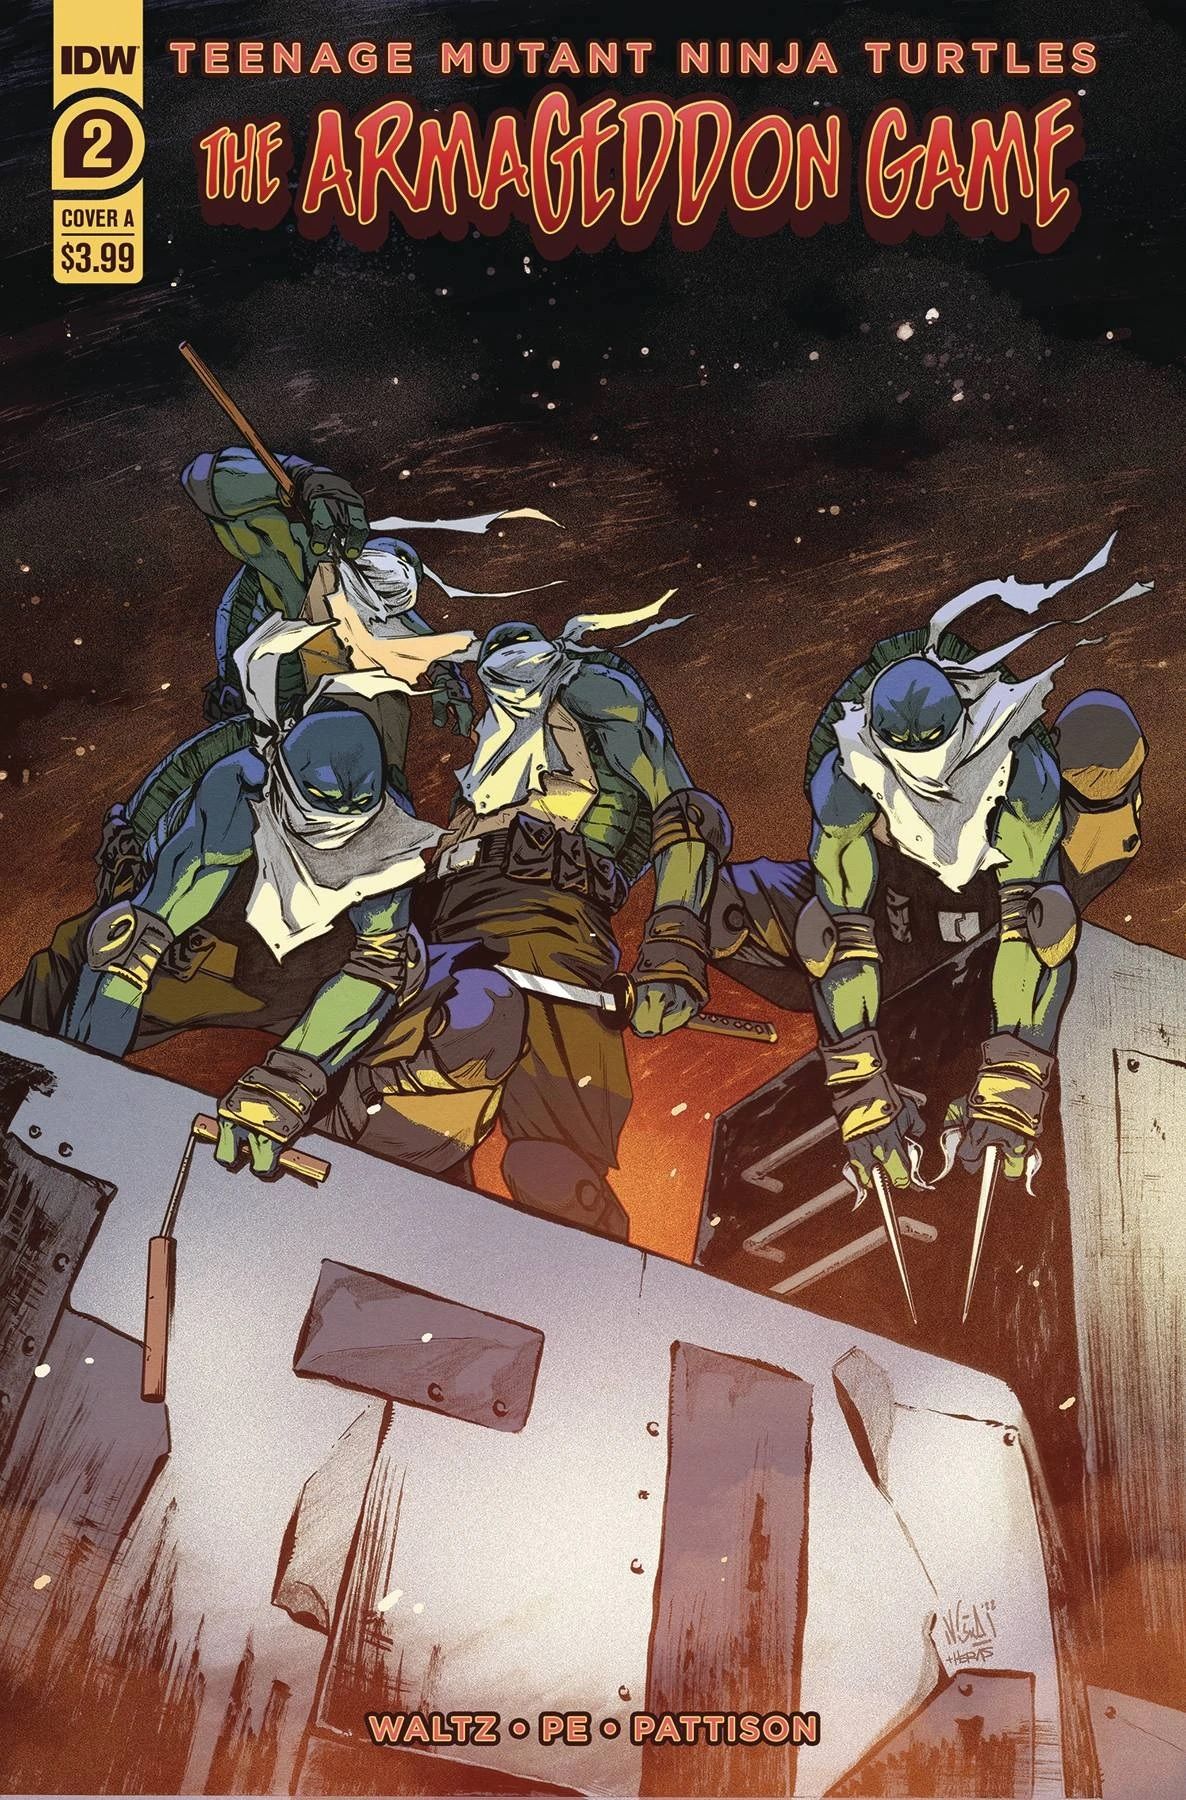 TMNT The Armageddon Game #2 Cover